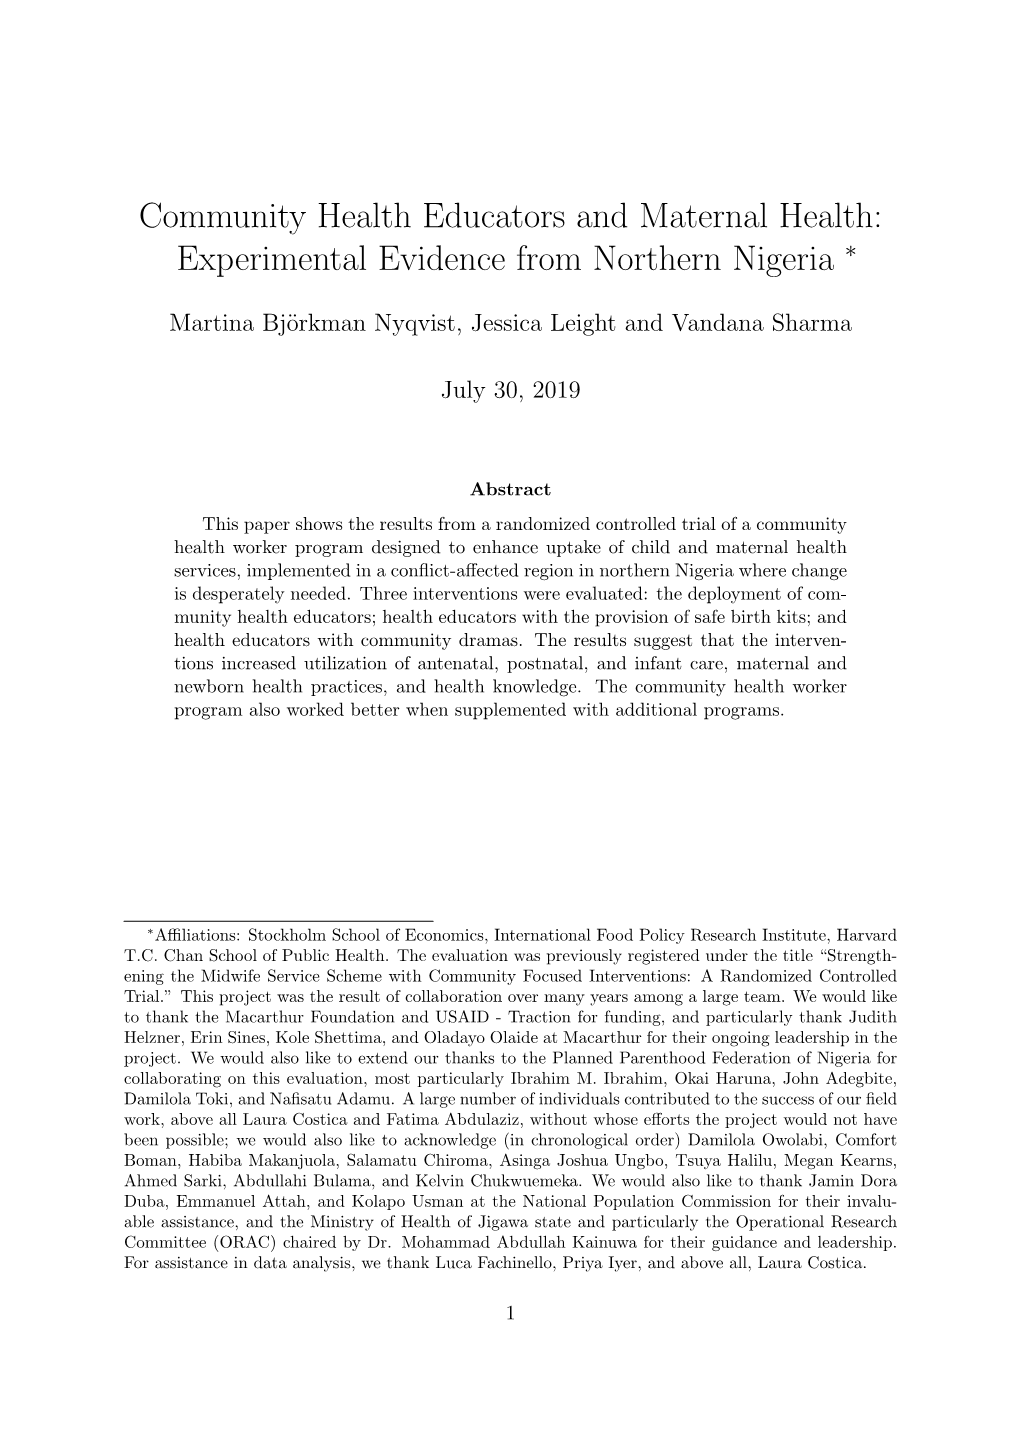 Community Health Educators and Maternal Health: Experimental Evidence from Northern Nigeria ∗